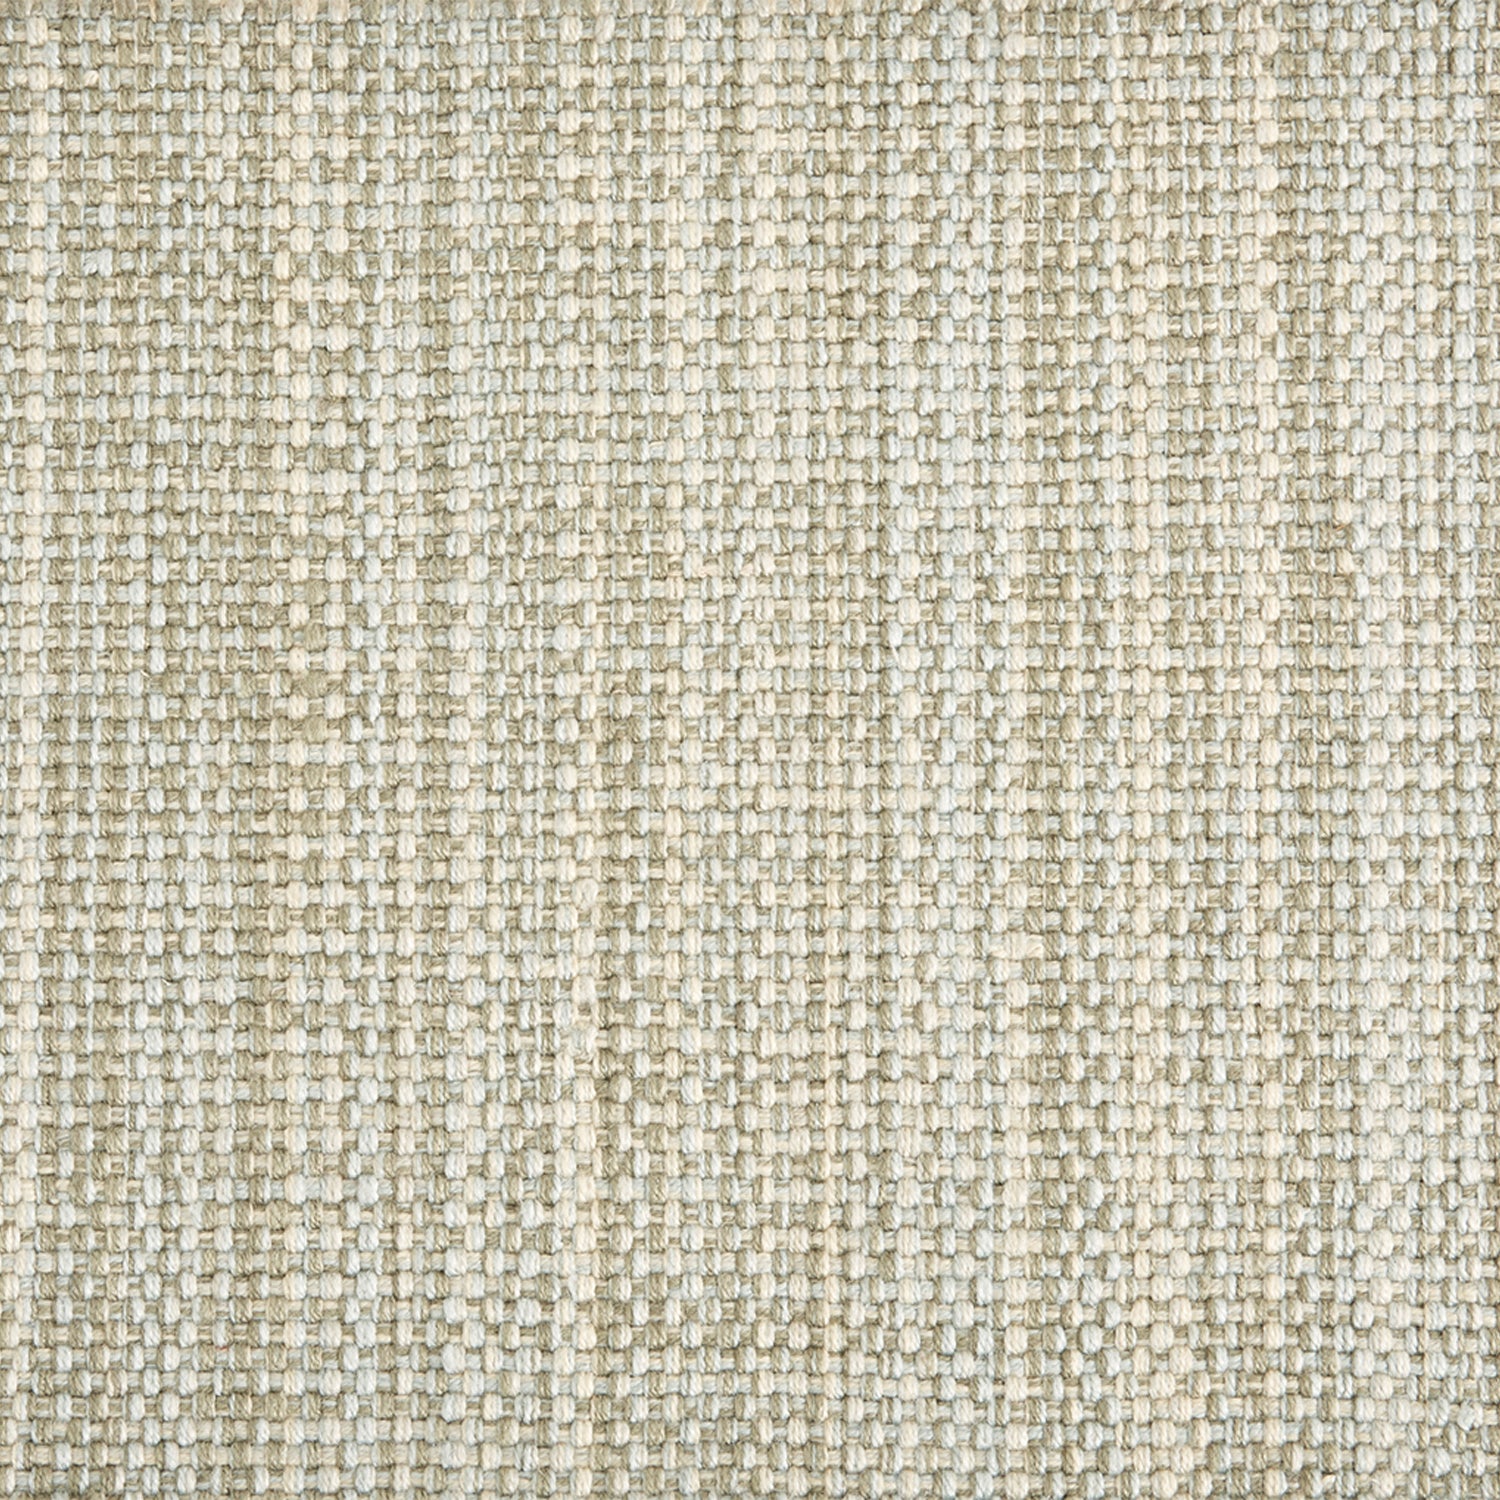 Outdoor broadloom carpet swatch in a chunky flatweave in mottled cream, sage and light blue.